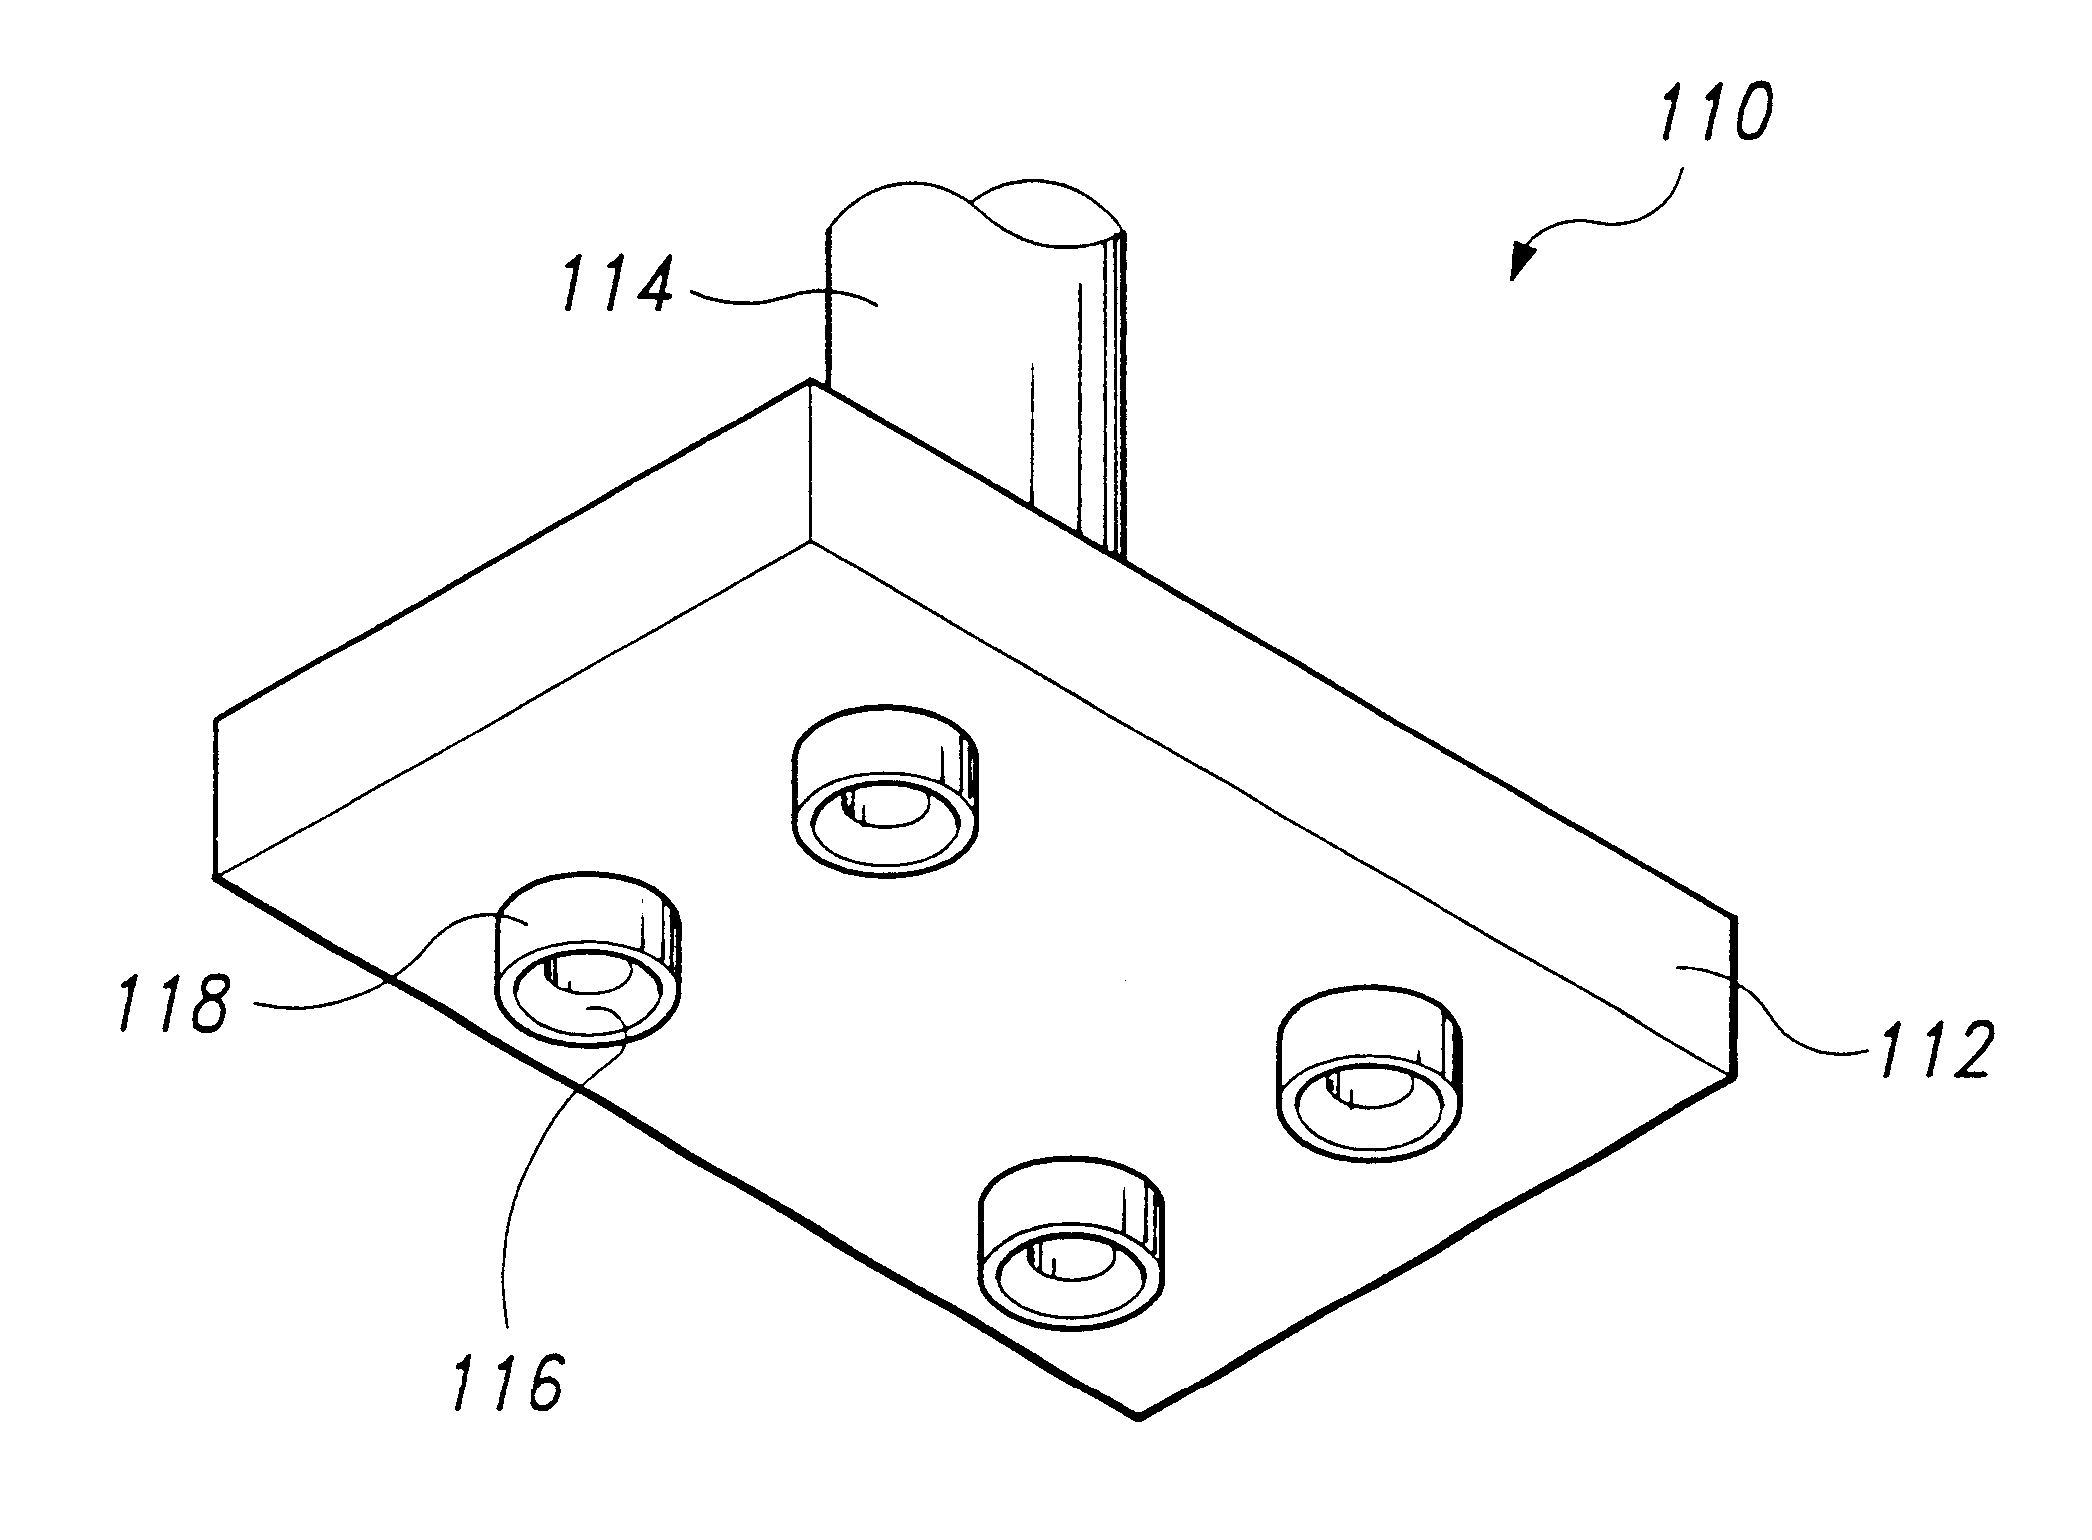 Die collet for a semiconductor chip and apparatus for bonding semiconductor chip to a lead frame